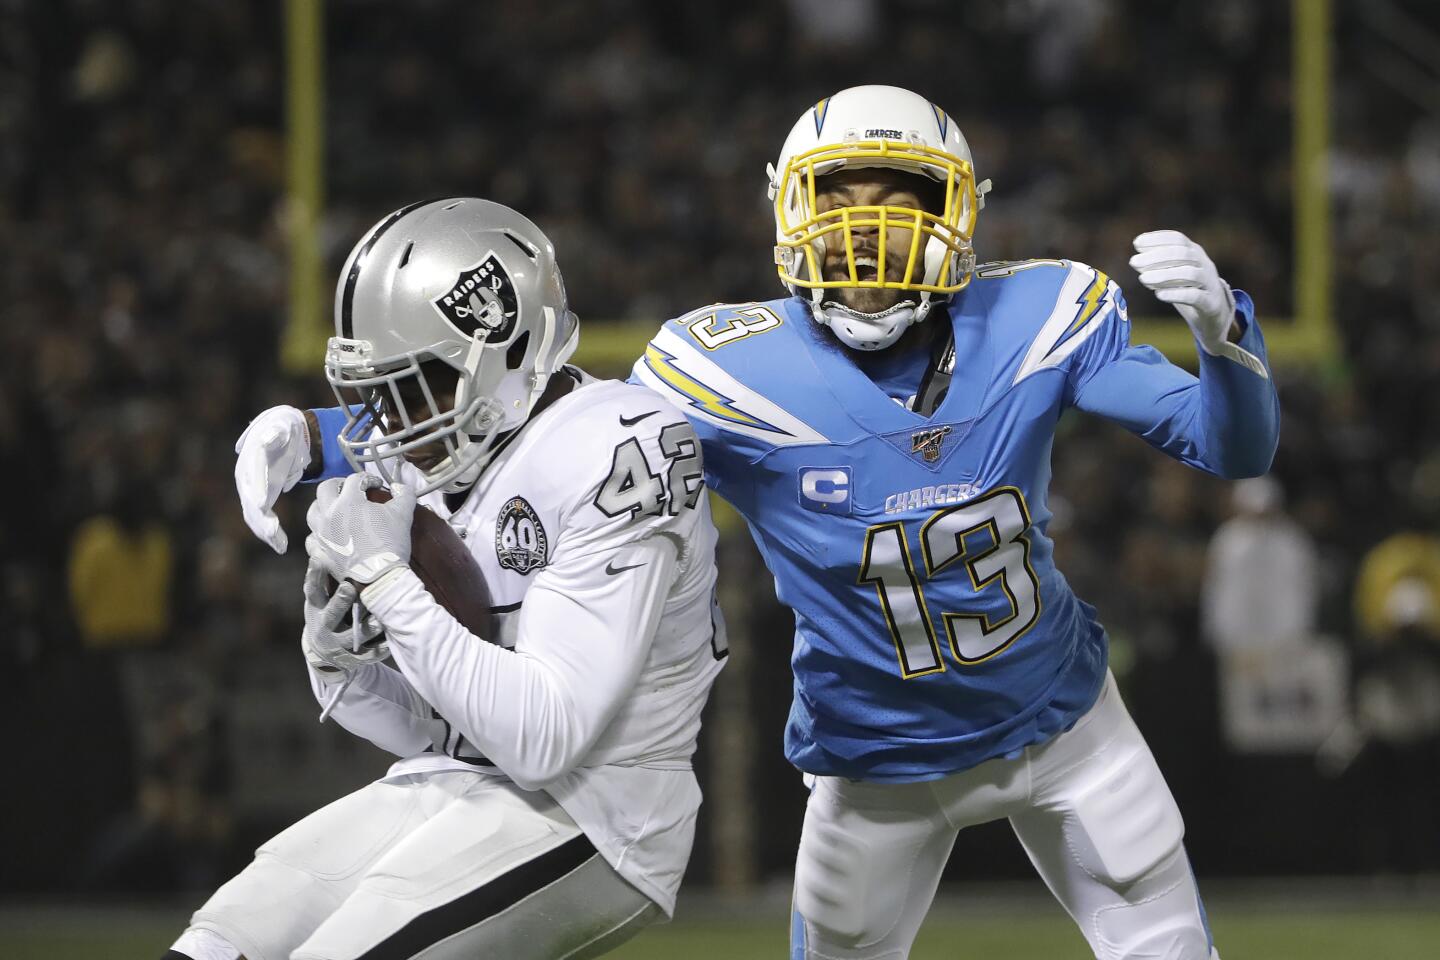 Raiders strong safety Karl Joseph (42) defends a pass intended for Chargers receiver Keenan Allen (13) during the first half of a game Nov. 7 at RingCentral Coliseum.